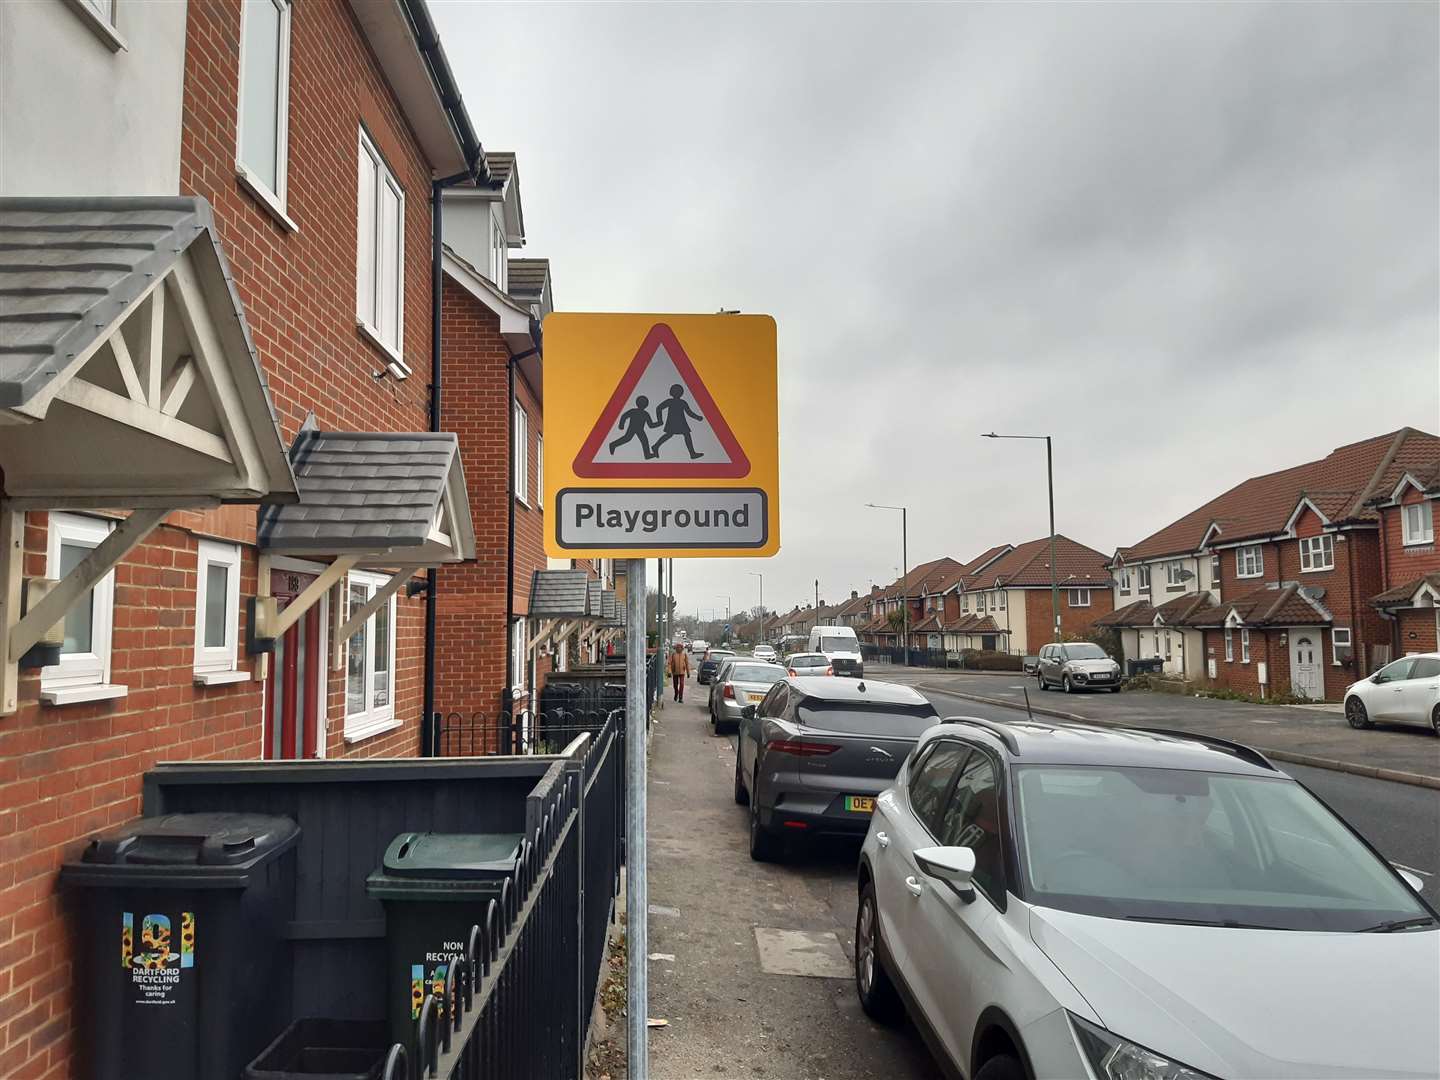 A children crossing sign has been put up on Watling Street. Photo: Sean Delaney